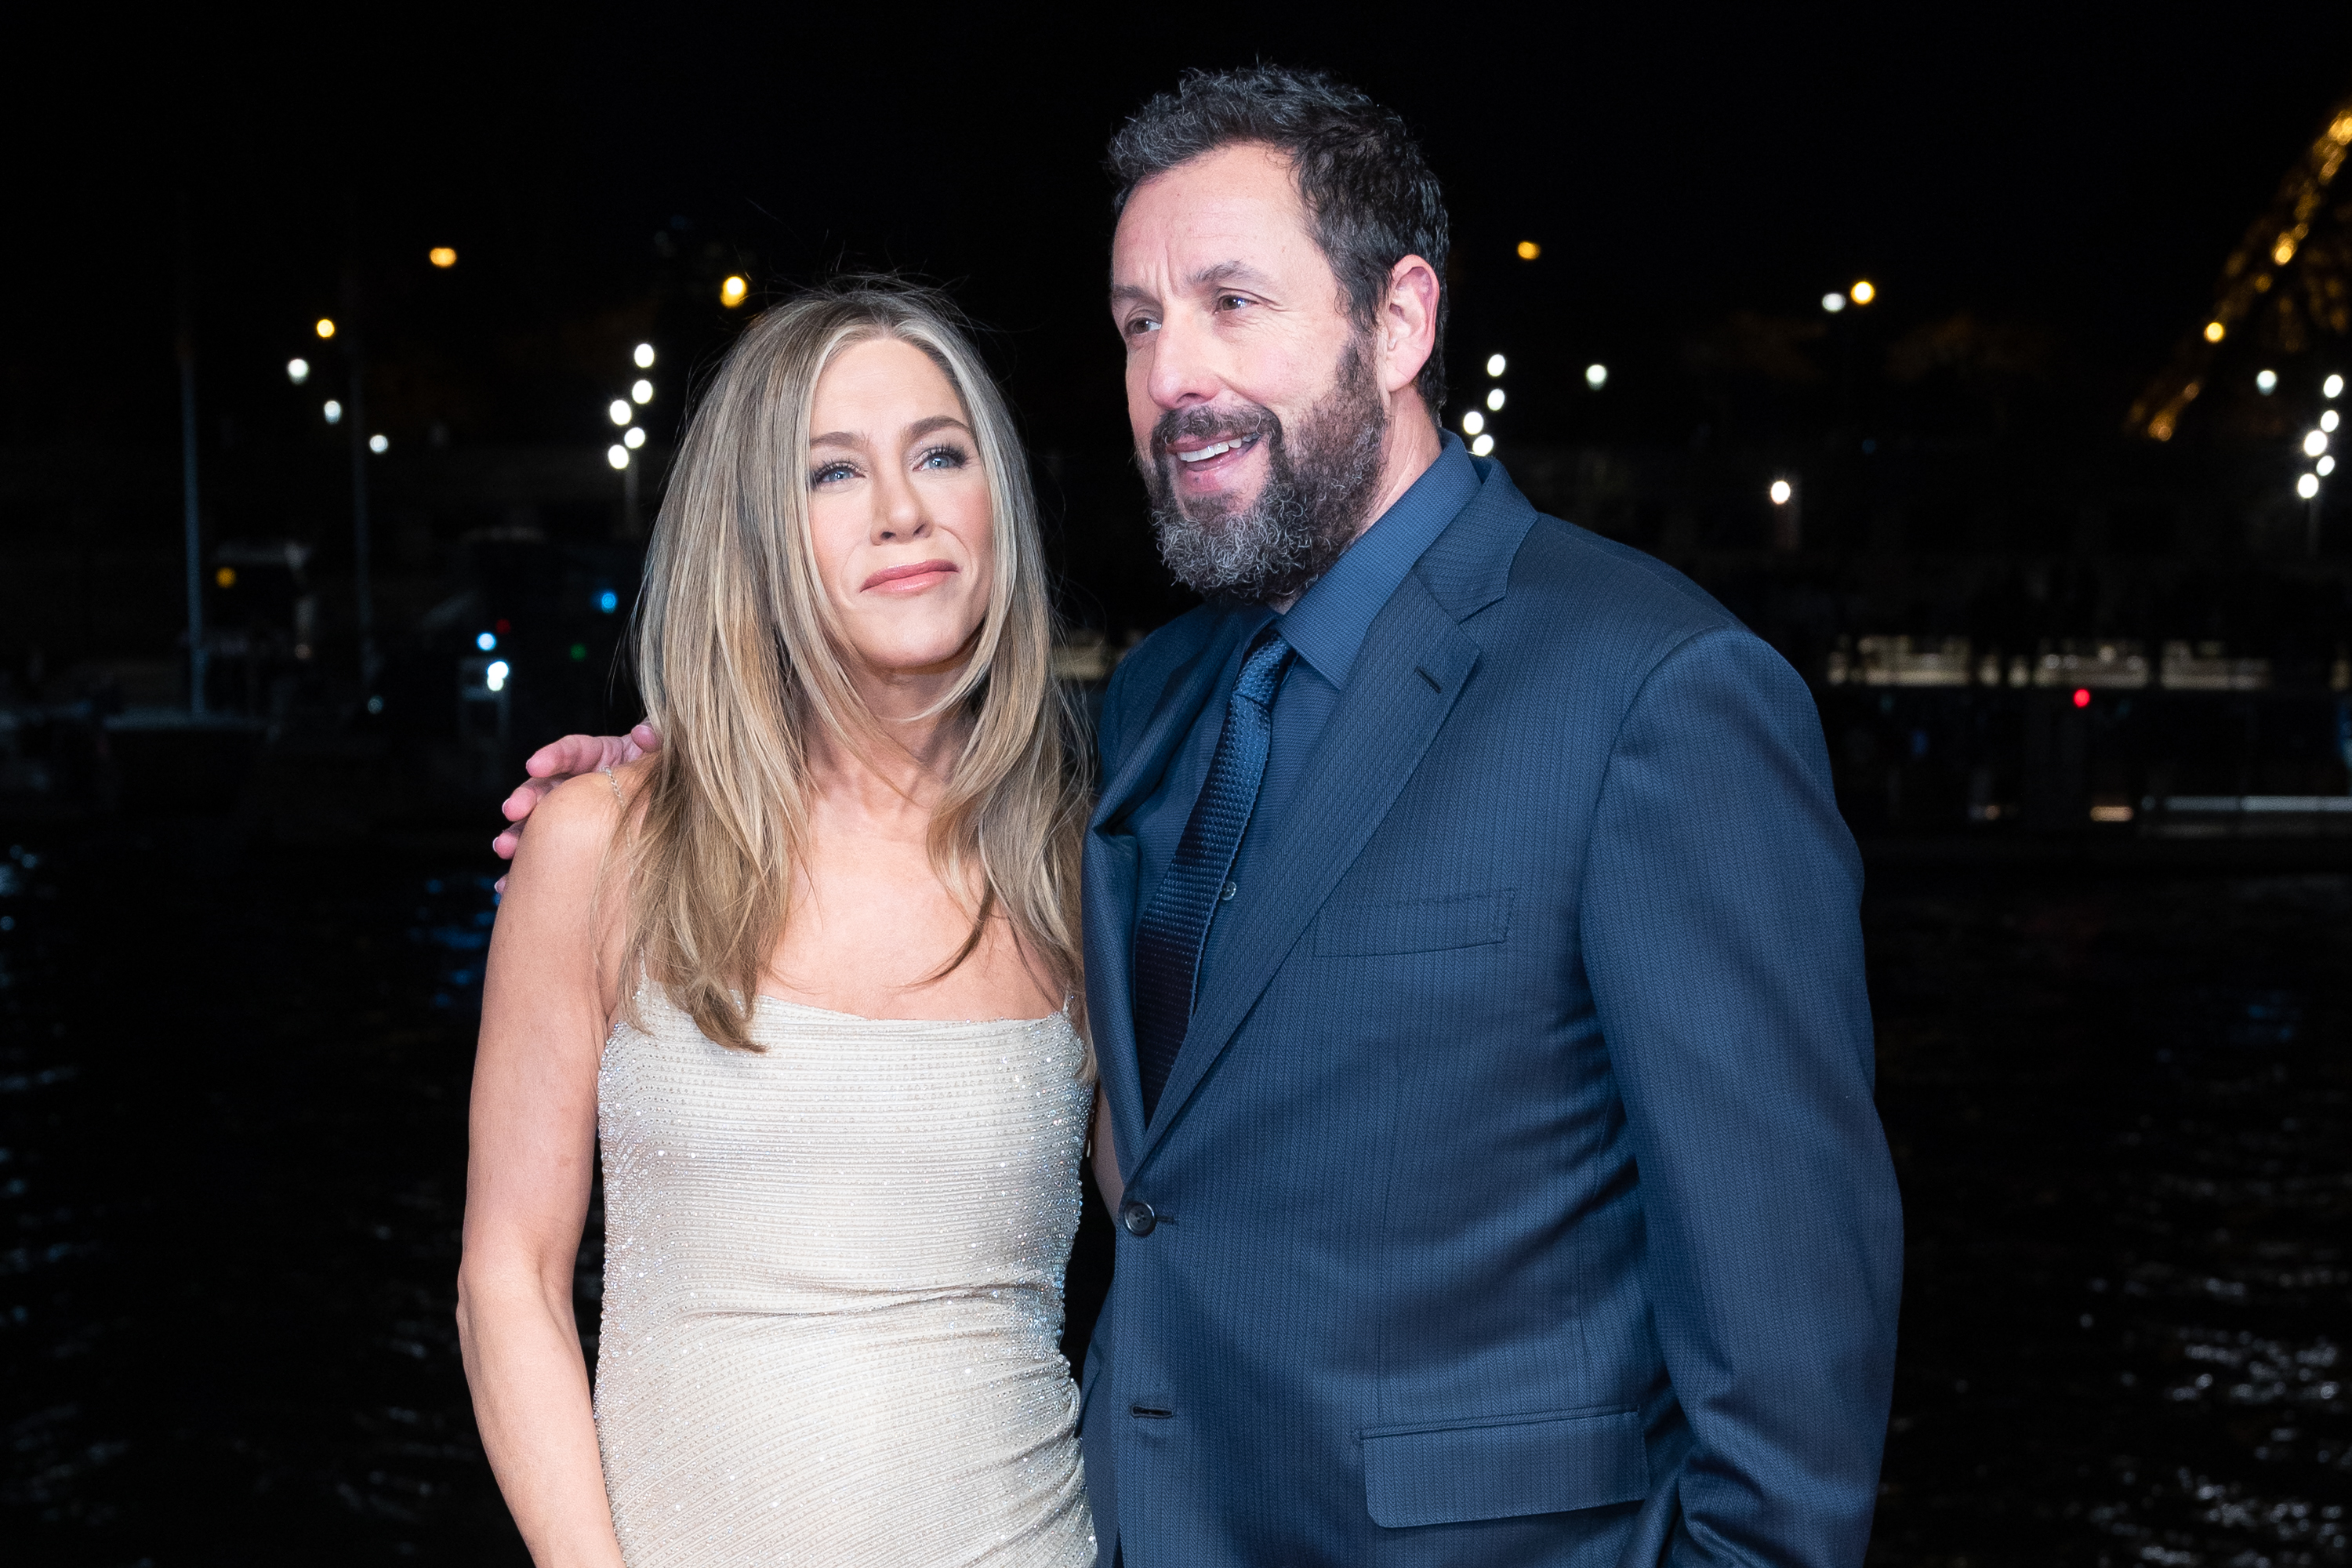 Jennifer Aniston and Adam Sandler in Paris, France on March 16, 2023 | Source: Getty Images